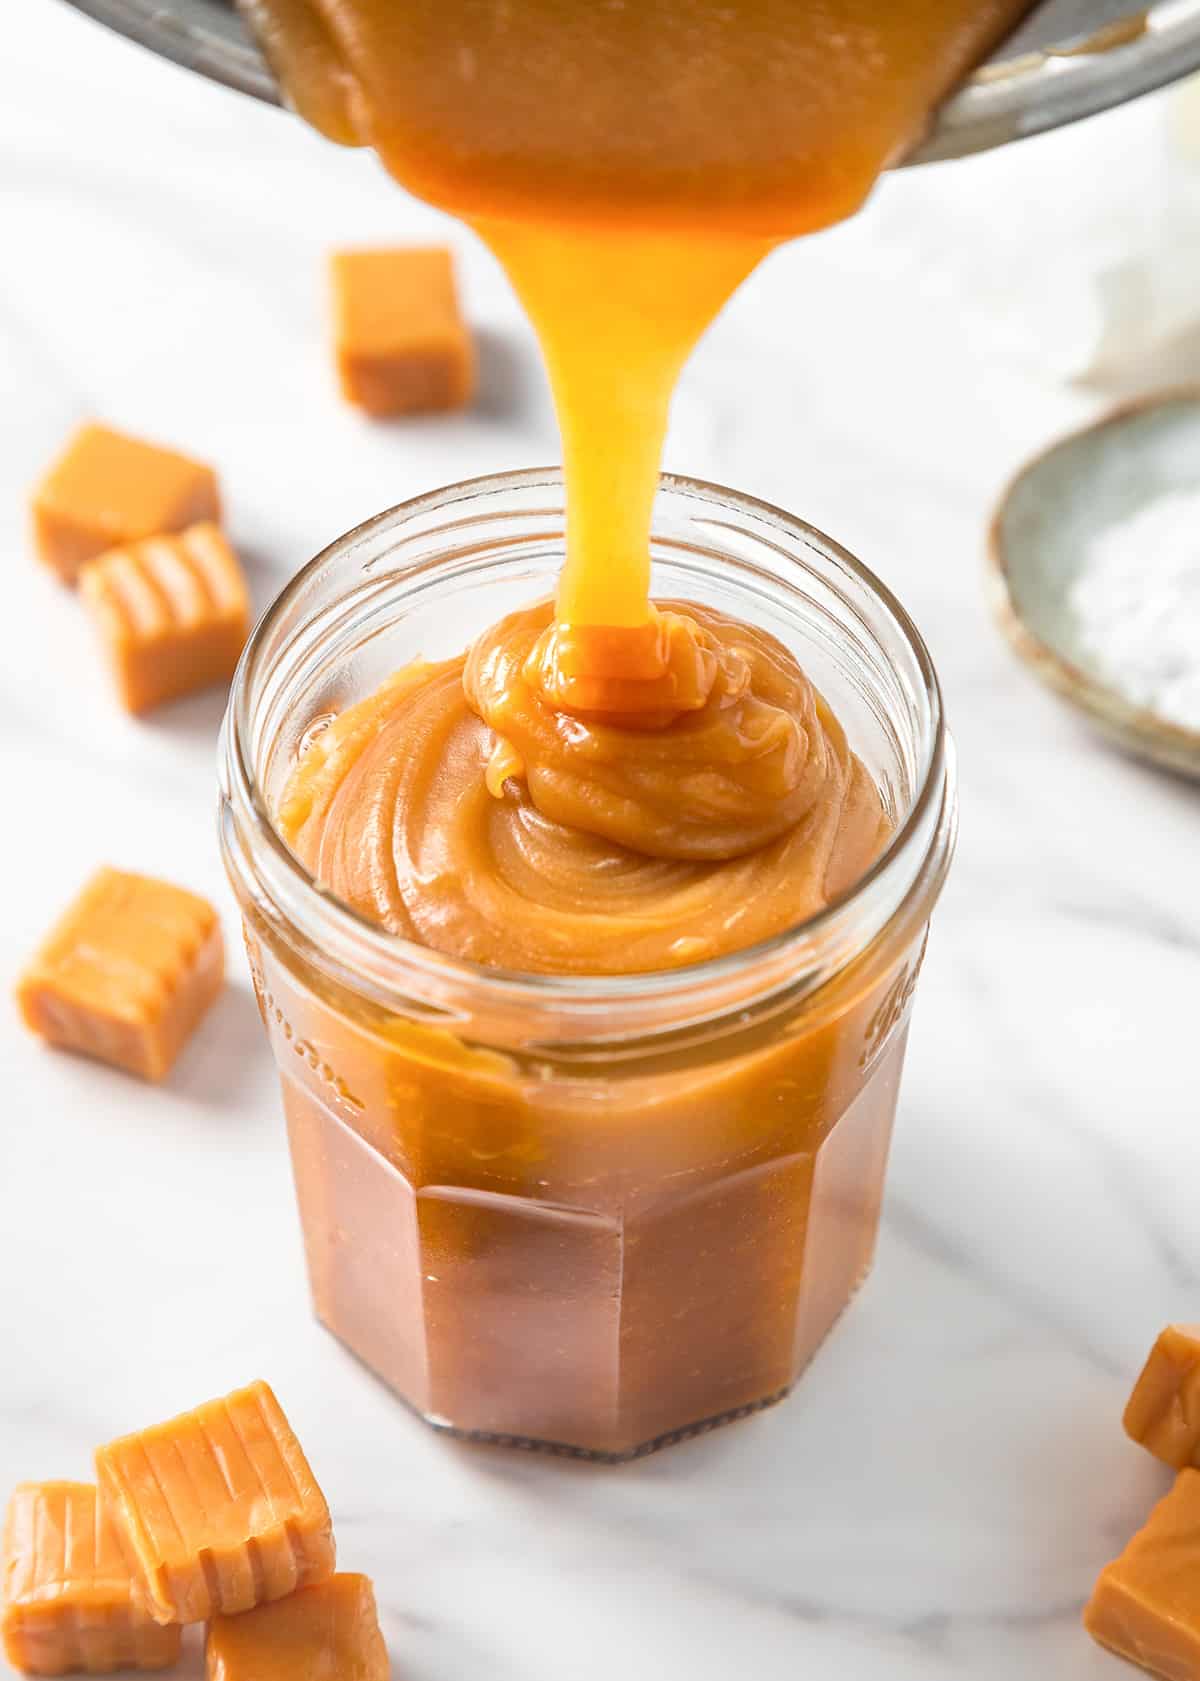 caramel sauce being poured from the pan into a glass jar 